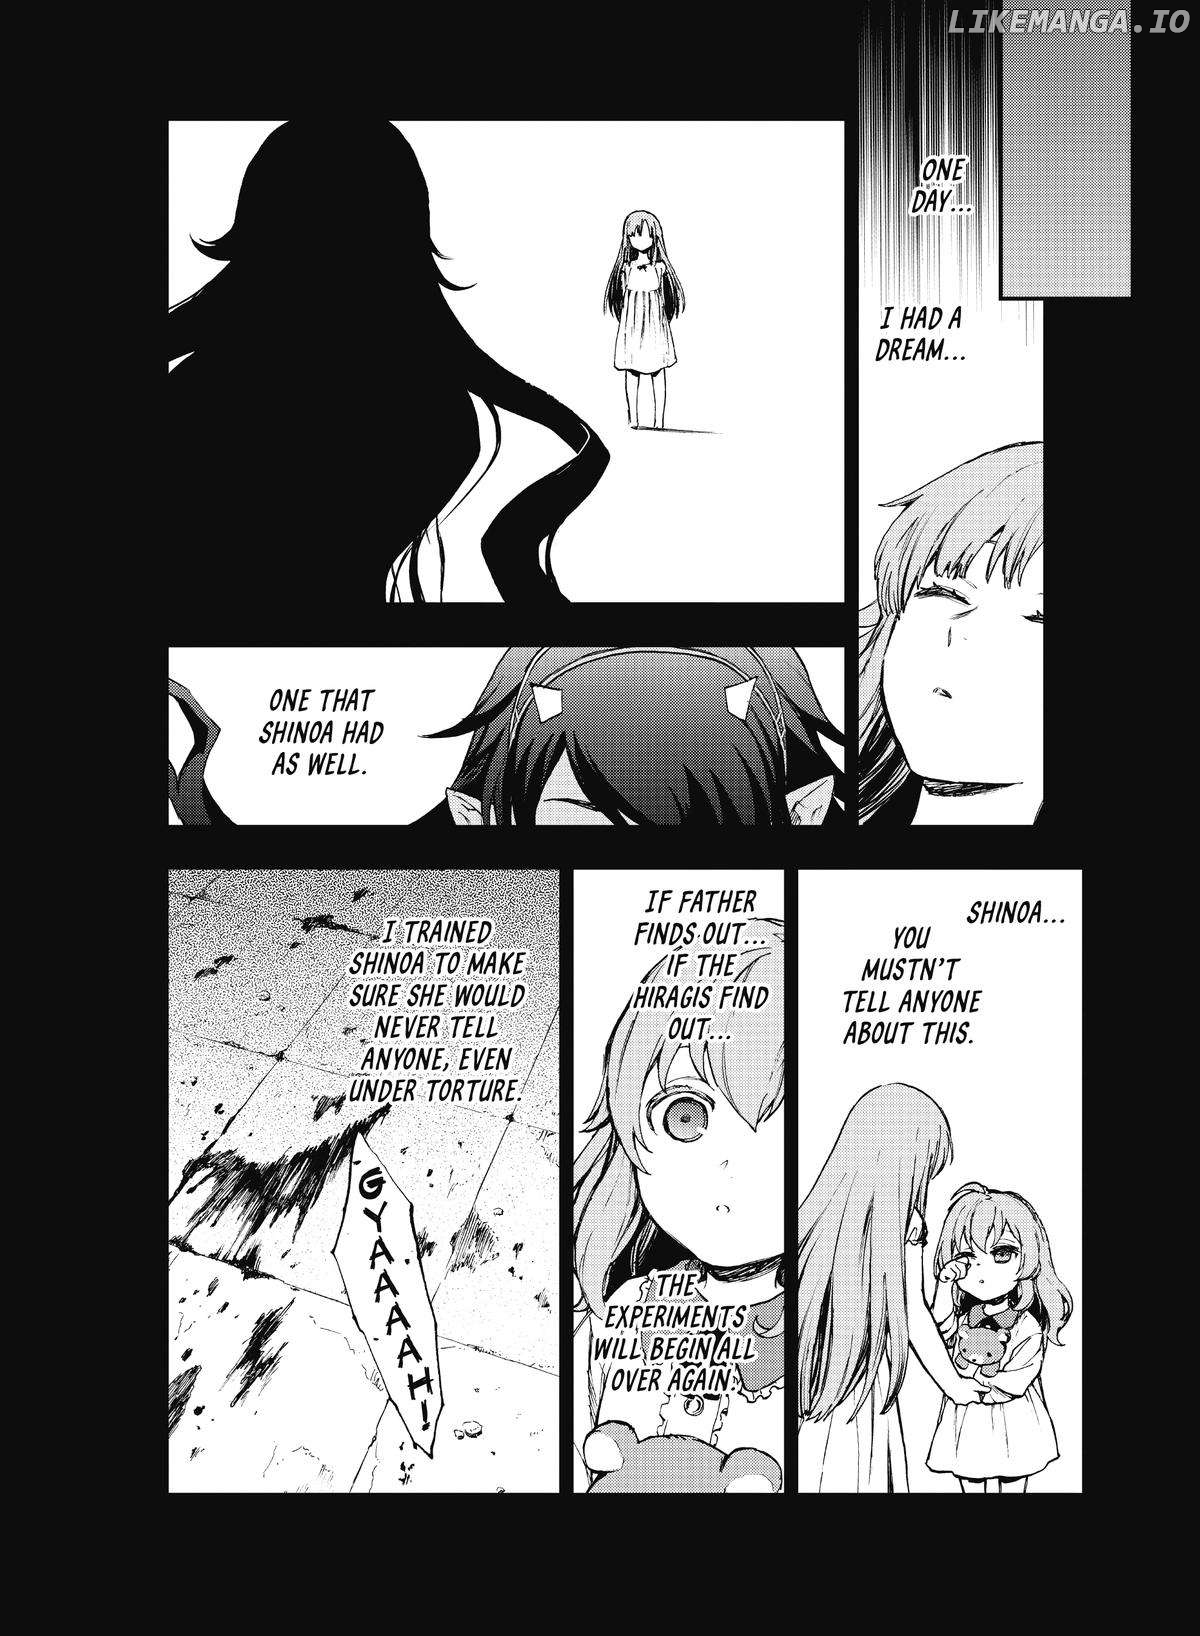 Seraph of the End: Guren Ichinose: Catastrophe at Sixteen Chapter 18 - page 4